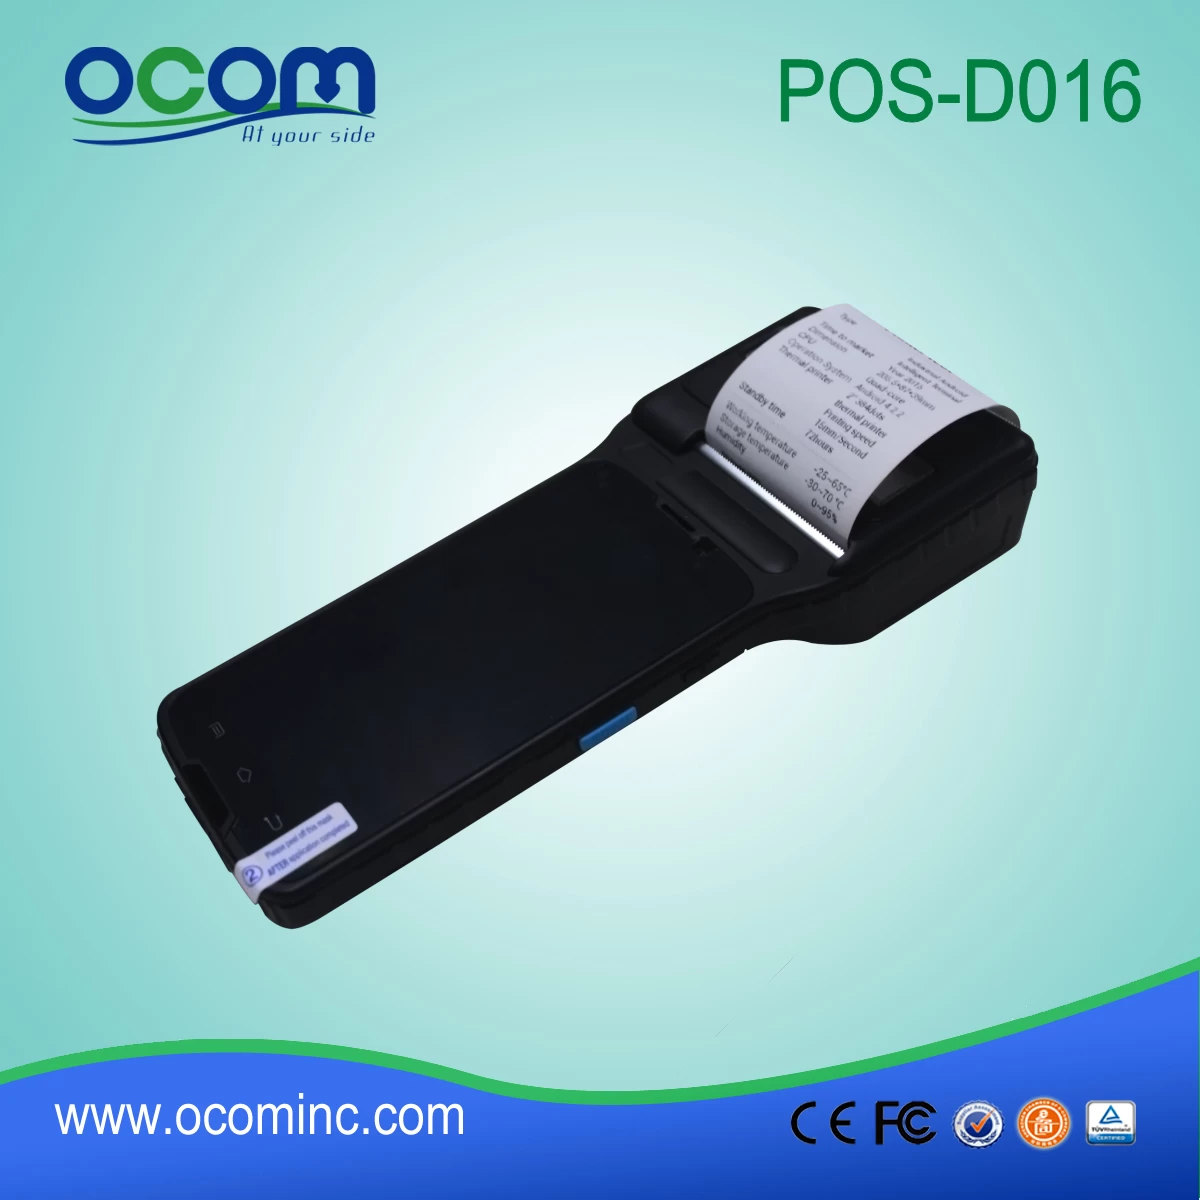 (OCBS-D016) Smart Handheld Android Terminal With Thermal Printer